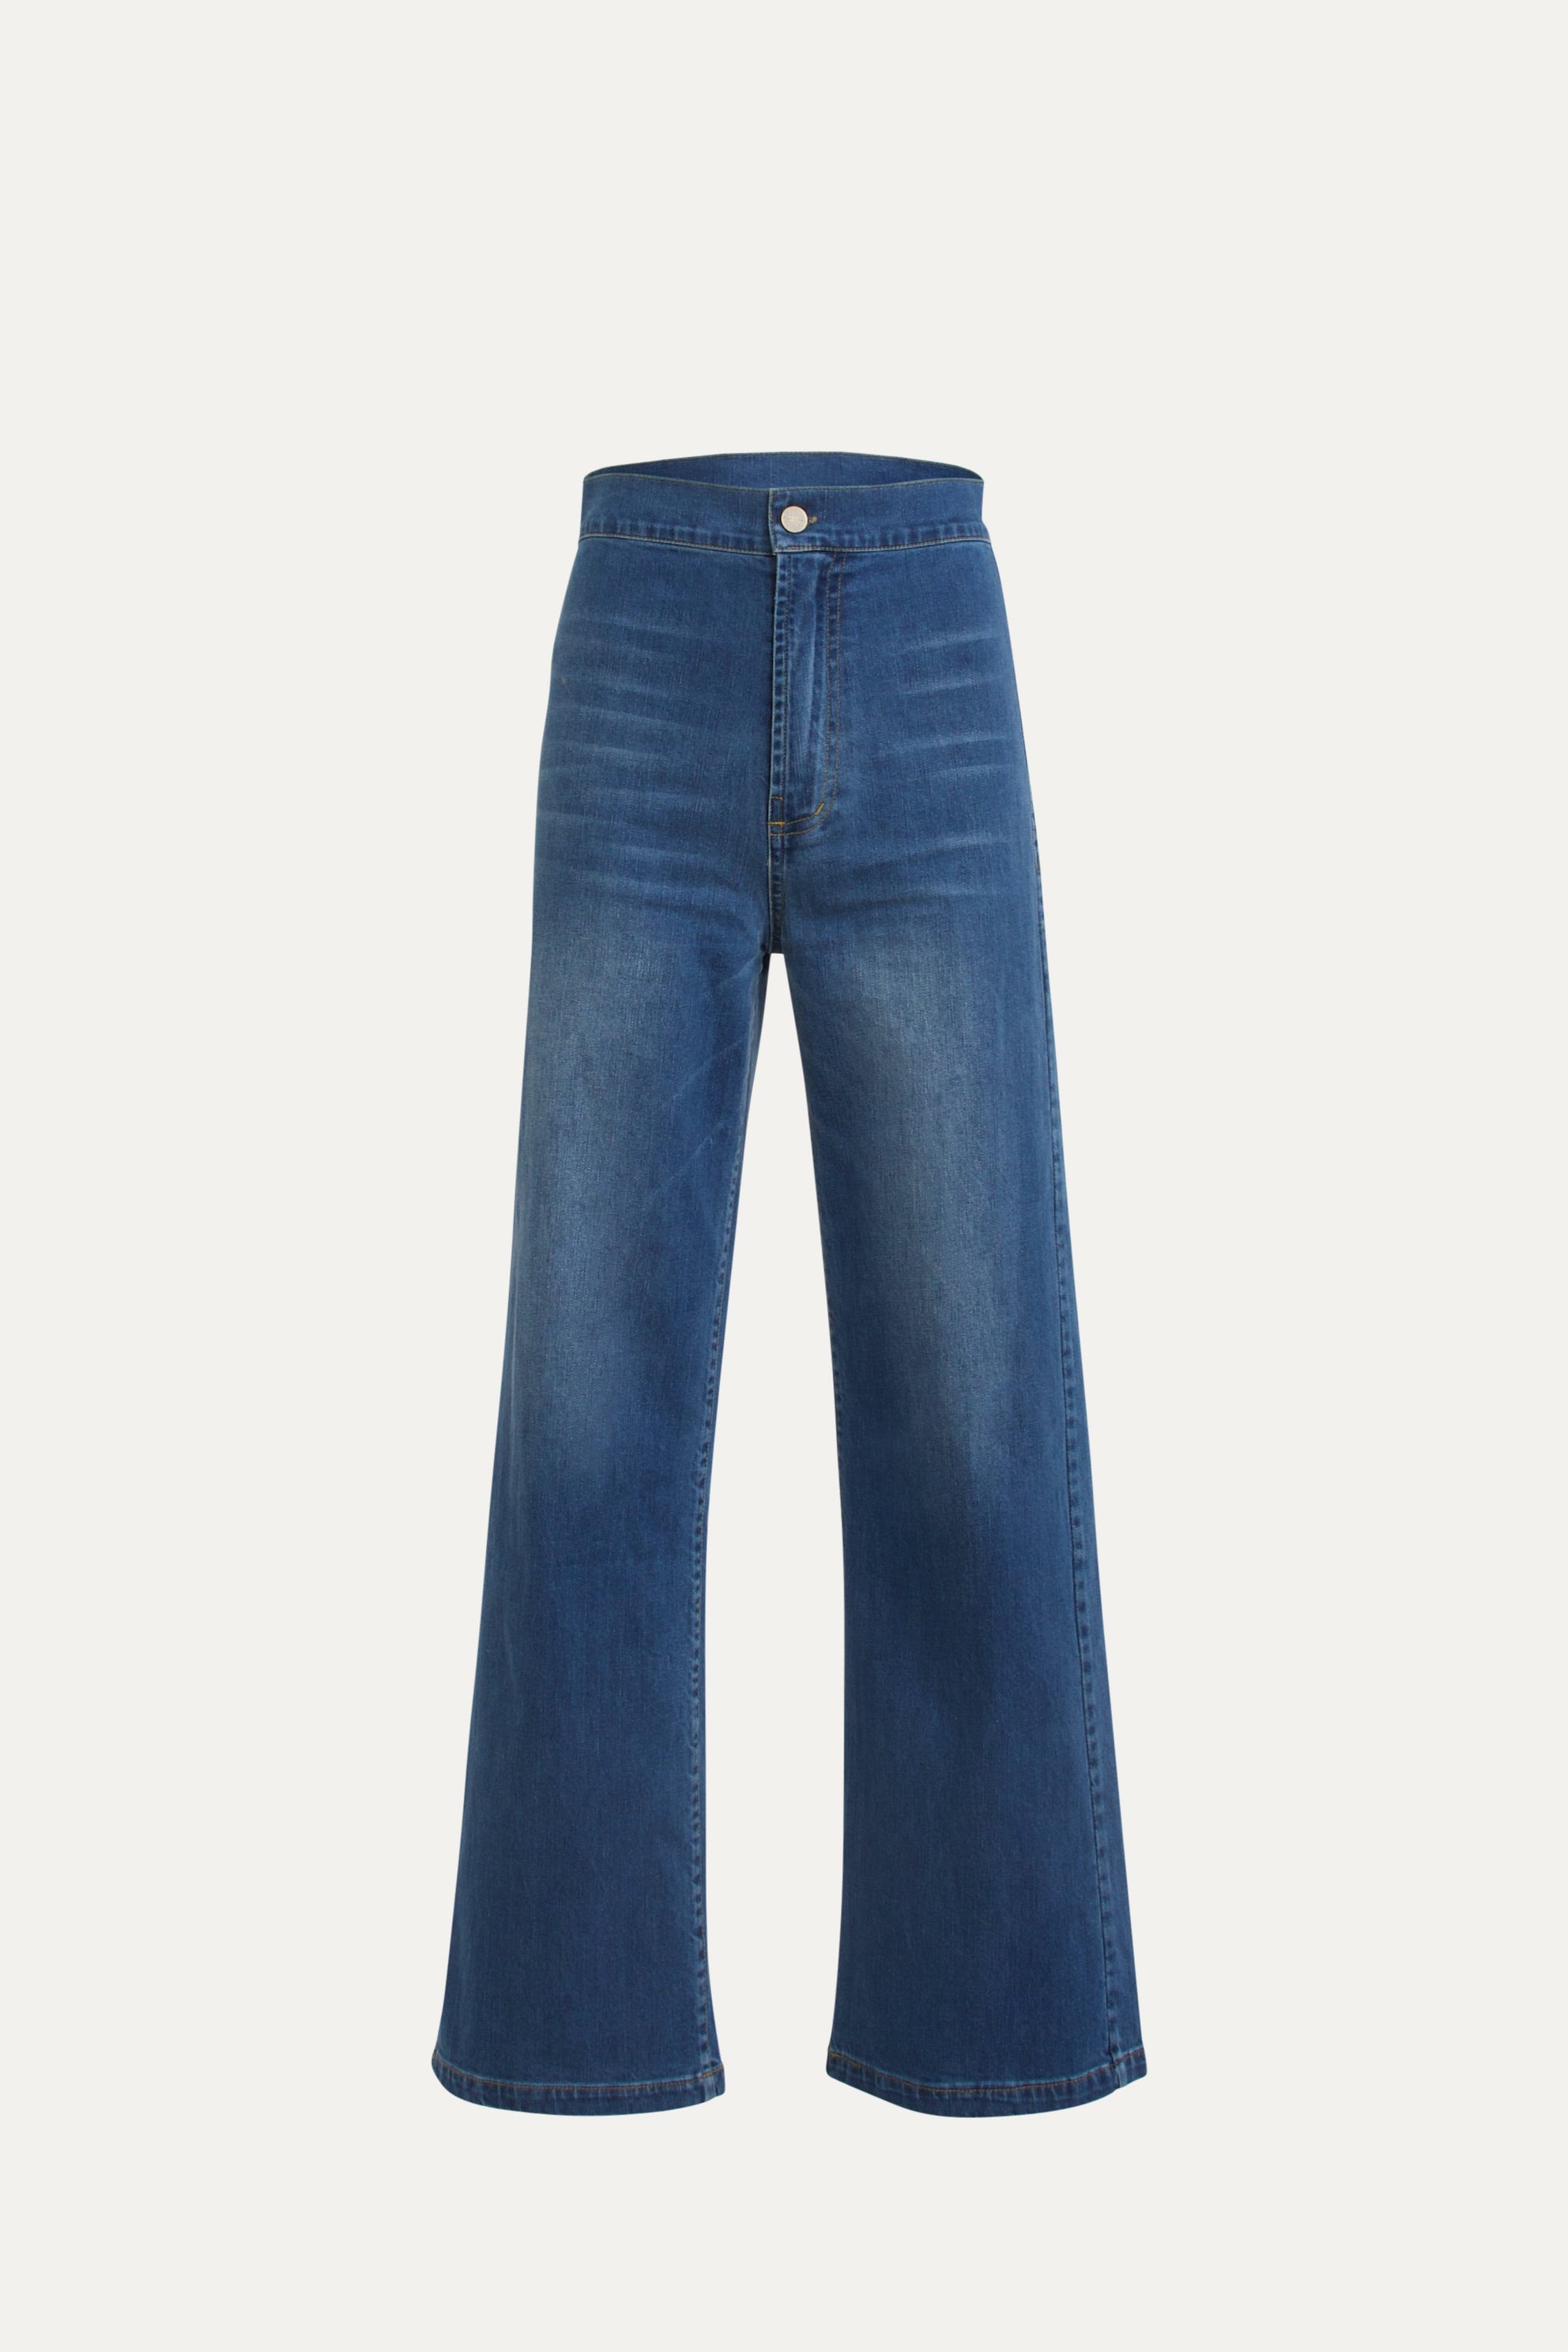 Crawford Jean | Wide Leg Jeans | Afterpay | FLANNEL America